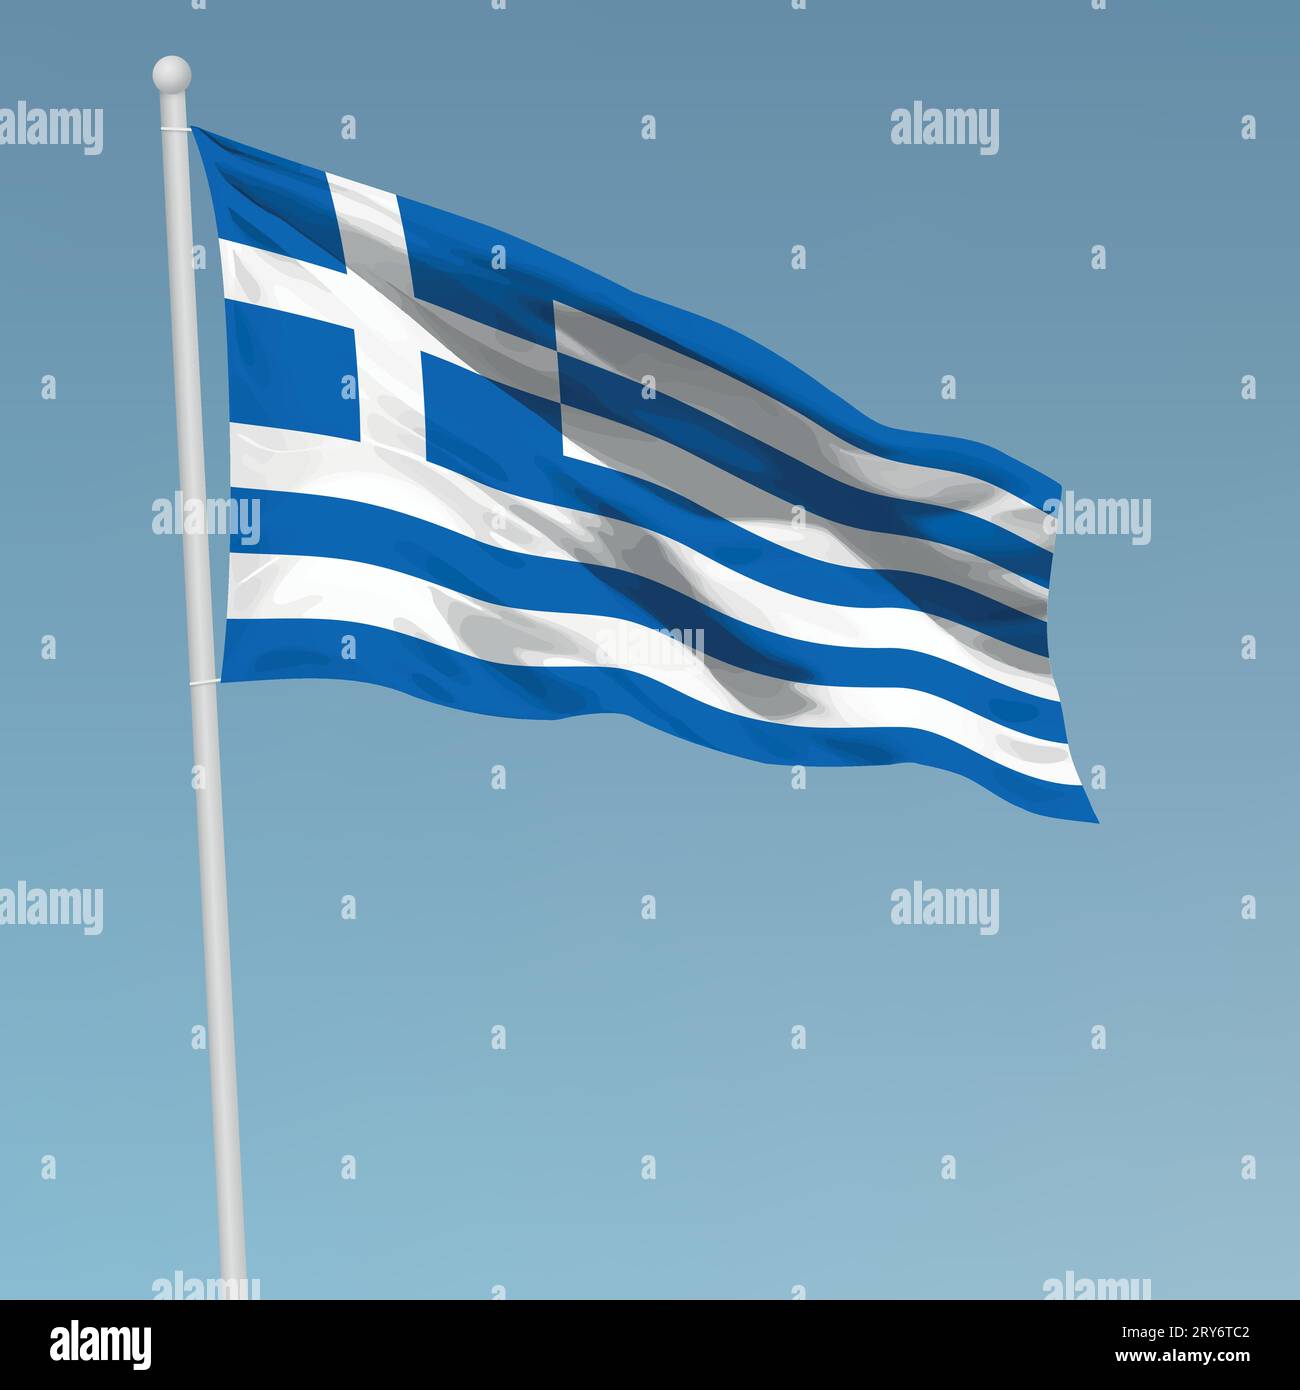 Waving flag of Greece on flagpole. Template for independence day poster design Stock Vector